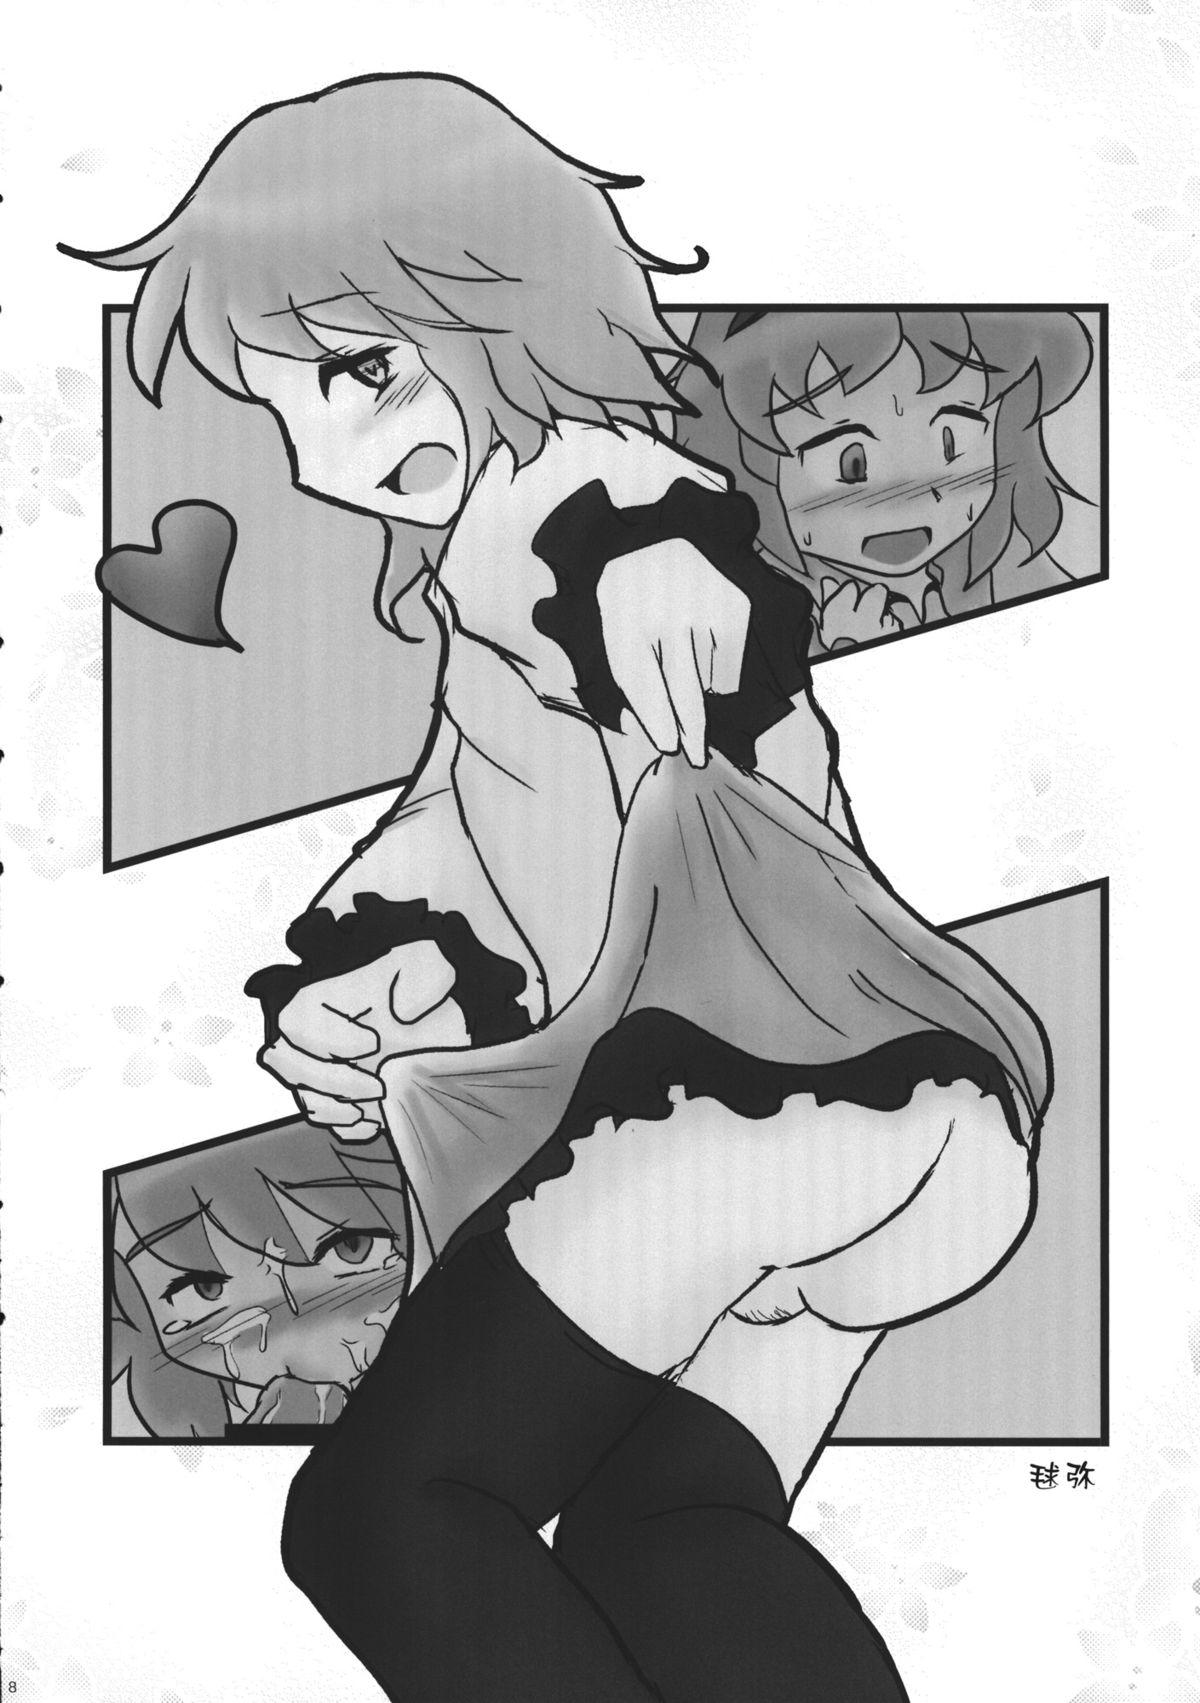 Urine Phallus no Yume - Touhou project Onlyfans - Page 7